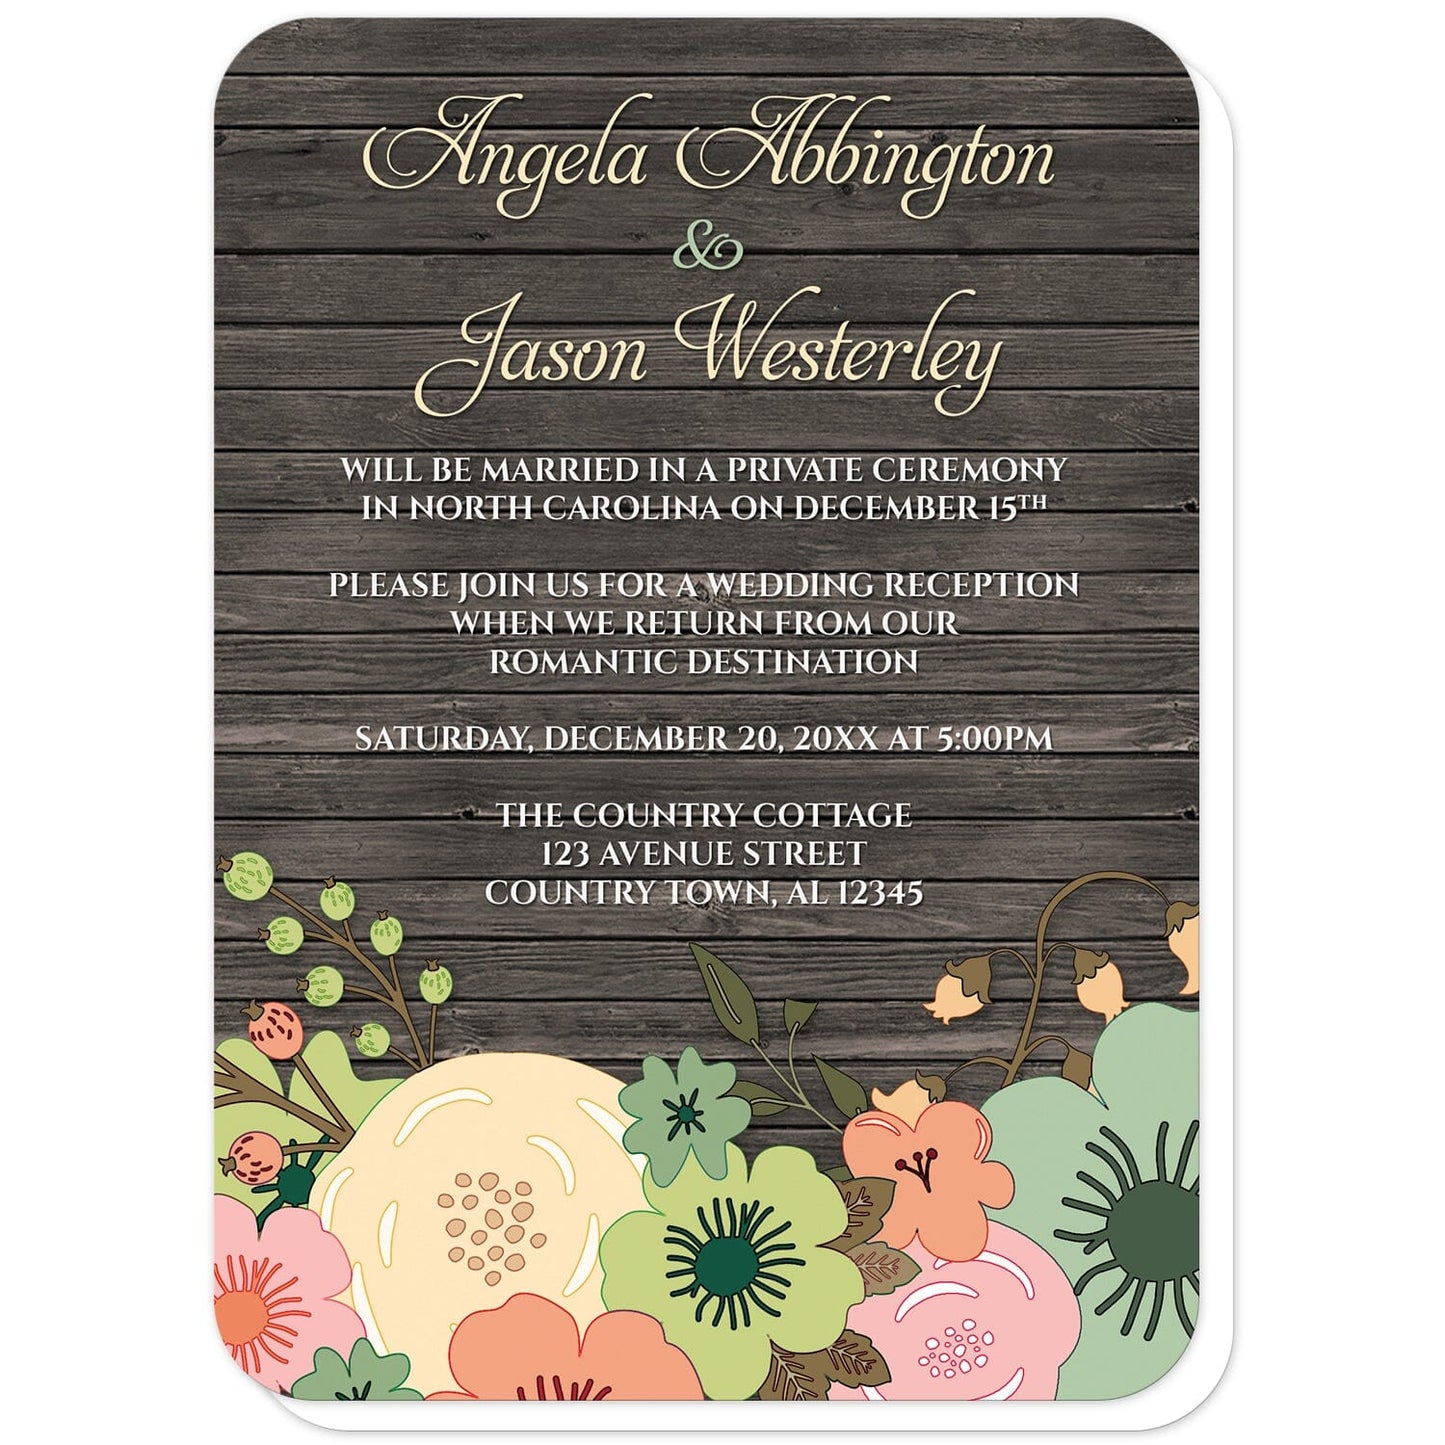 Rustic Orange Teal Floral Wood Reception Only Invitations (with rounded corners) at Artistically Invited. Rustic orange teal floral wood reception only invitations designed with a southern country orange, beige, and teal floral theme with pink and green accent flowers. This floral illustration is printed along the bottom of the invitations over a dark brown rustic wood background. Your personalized post-wedding reception details are custom printed in beige and white over the wood design above the flowers.